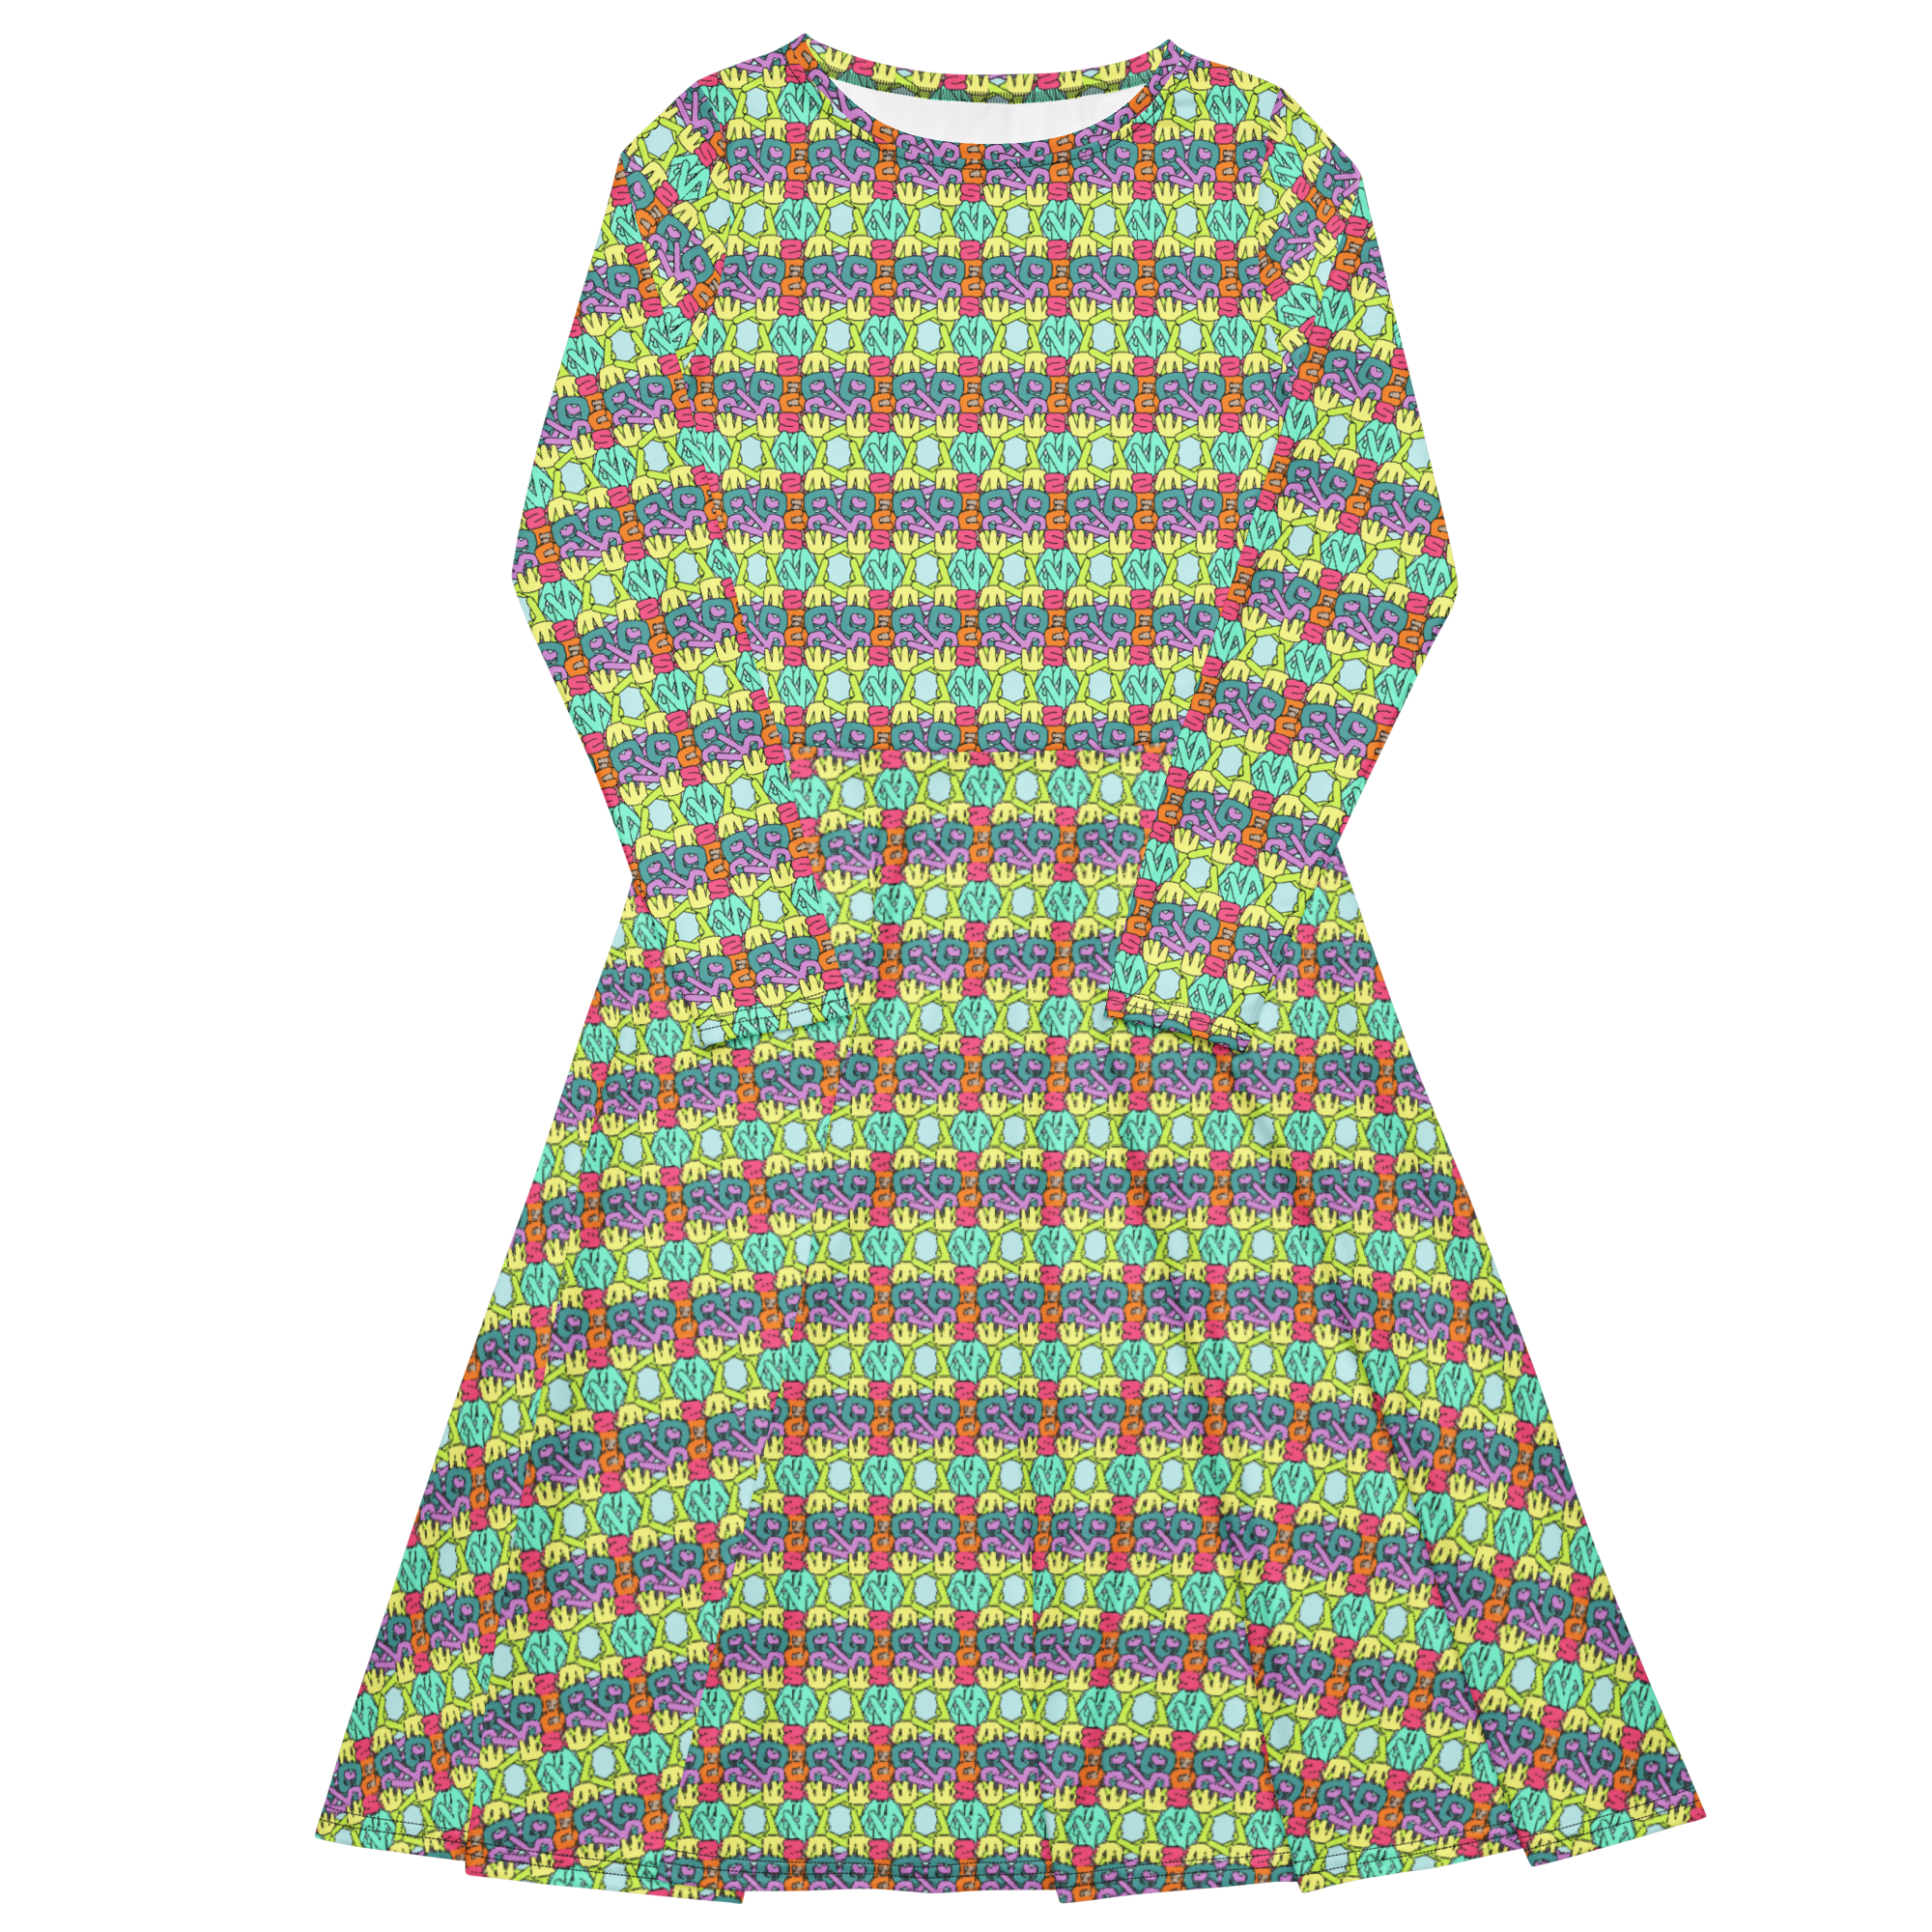 TWISTED SCENARIO PATTERNED DRESS